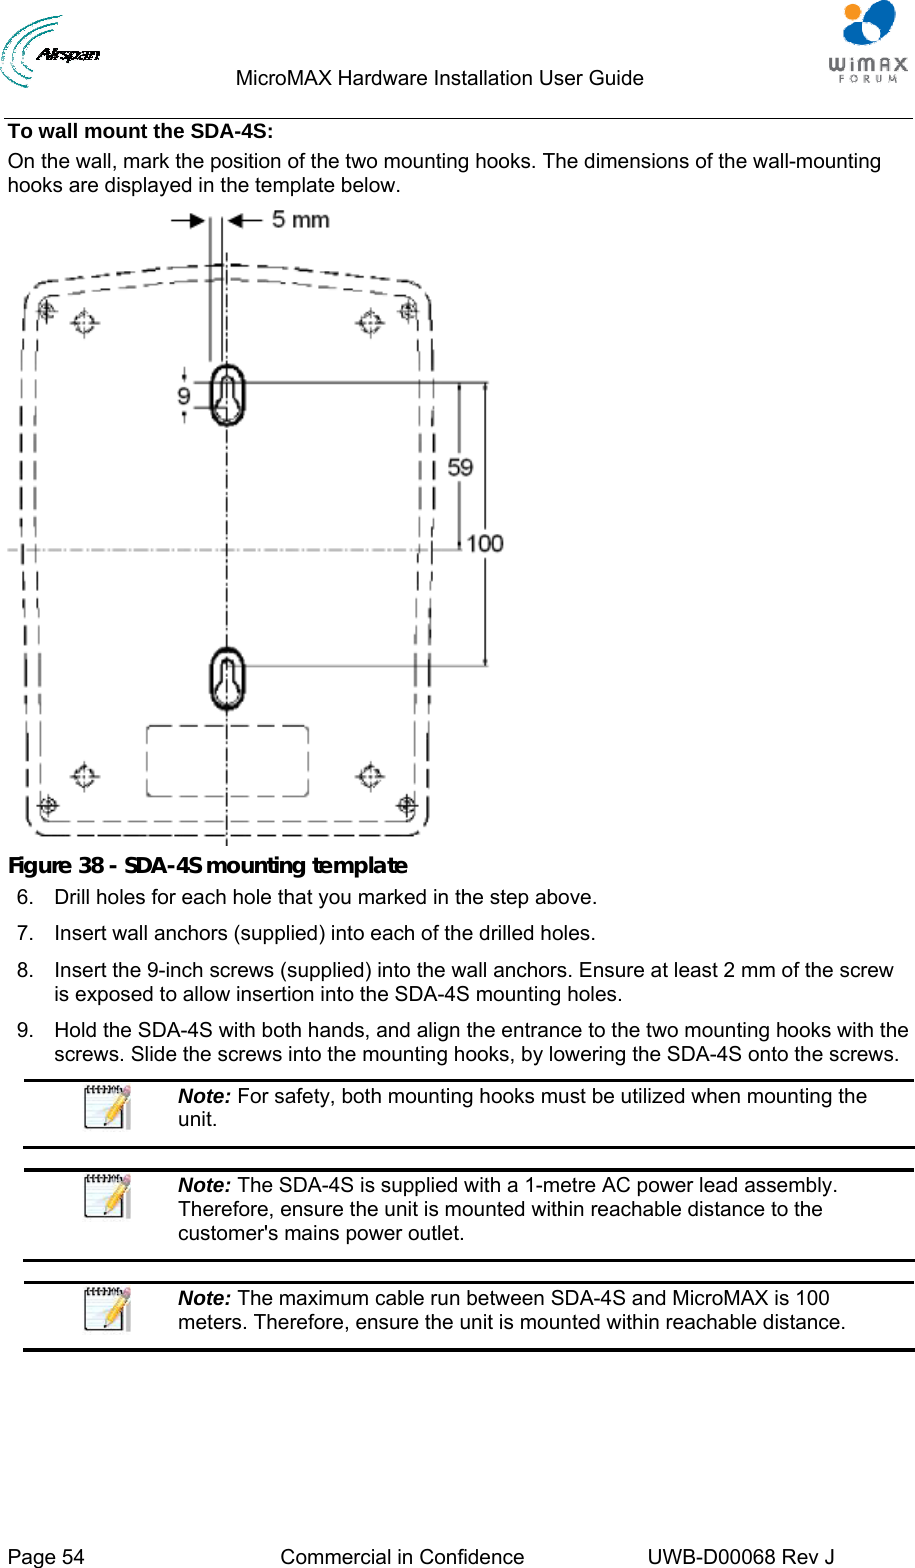                                  MicroMAX Hardware Installation User Guide     Page 54  Commercial in Confidence  UWB-D00068 Rev J   To wall mount the SDA-4S: On the wall, mark the position of the two mounting hooks. The dimensions of the wall-mounting hooks are displayed in the template below.  Figure 38 - SDA-4S mounting template 6.  Drill holes for each hole that you marked in the step above. 7.  Insert wall anchors (supplied) into each of the drilled holes. 8.  Insert the 9-inch screws (supplied) into the wall anchors. Ensure at least 2 mm of the screw is exposed to allow insertion into the SDA-4S mounting holes. 9.  Hold the SDA-4S with both hands, and align the entrance to the two mounting hooks with the screws. Slide the screws into the mounting hooks, by lowering the SDA-4S onto the screws.  Note: For safety, both mounting hooks must be utilized when mounting the unit.   Note: The SDA-4S is supplied with a 1-metre AC power lead assembly. Therefore, ensure the unit is mounted within reachable distance to the customer&apos;s mains power outlet.   Note: The maximum cable run between SDA-4S and MicroMAX is 100 meters. Therefore, ensure the unit is mounted within reachable distance.  